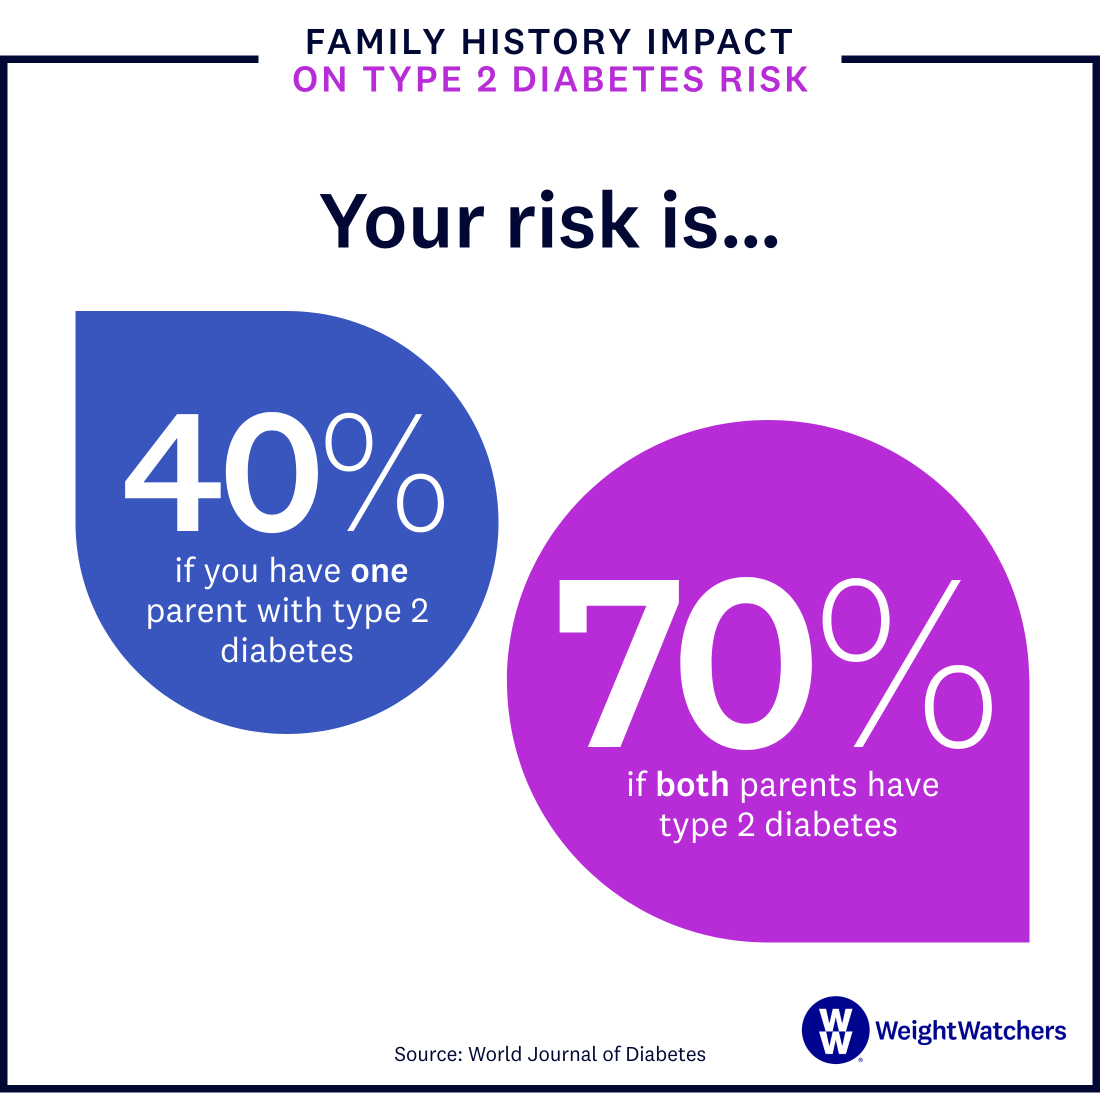 Family history impact on type 2 diabetes risk - 40% if one parent has T2D and 70% of both parents have T2D